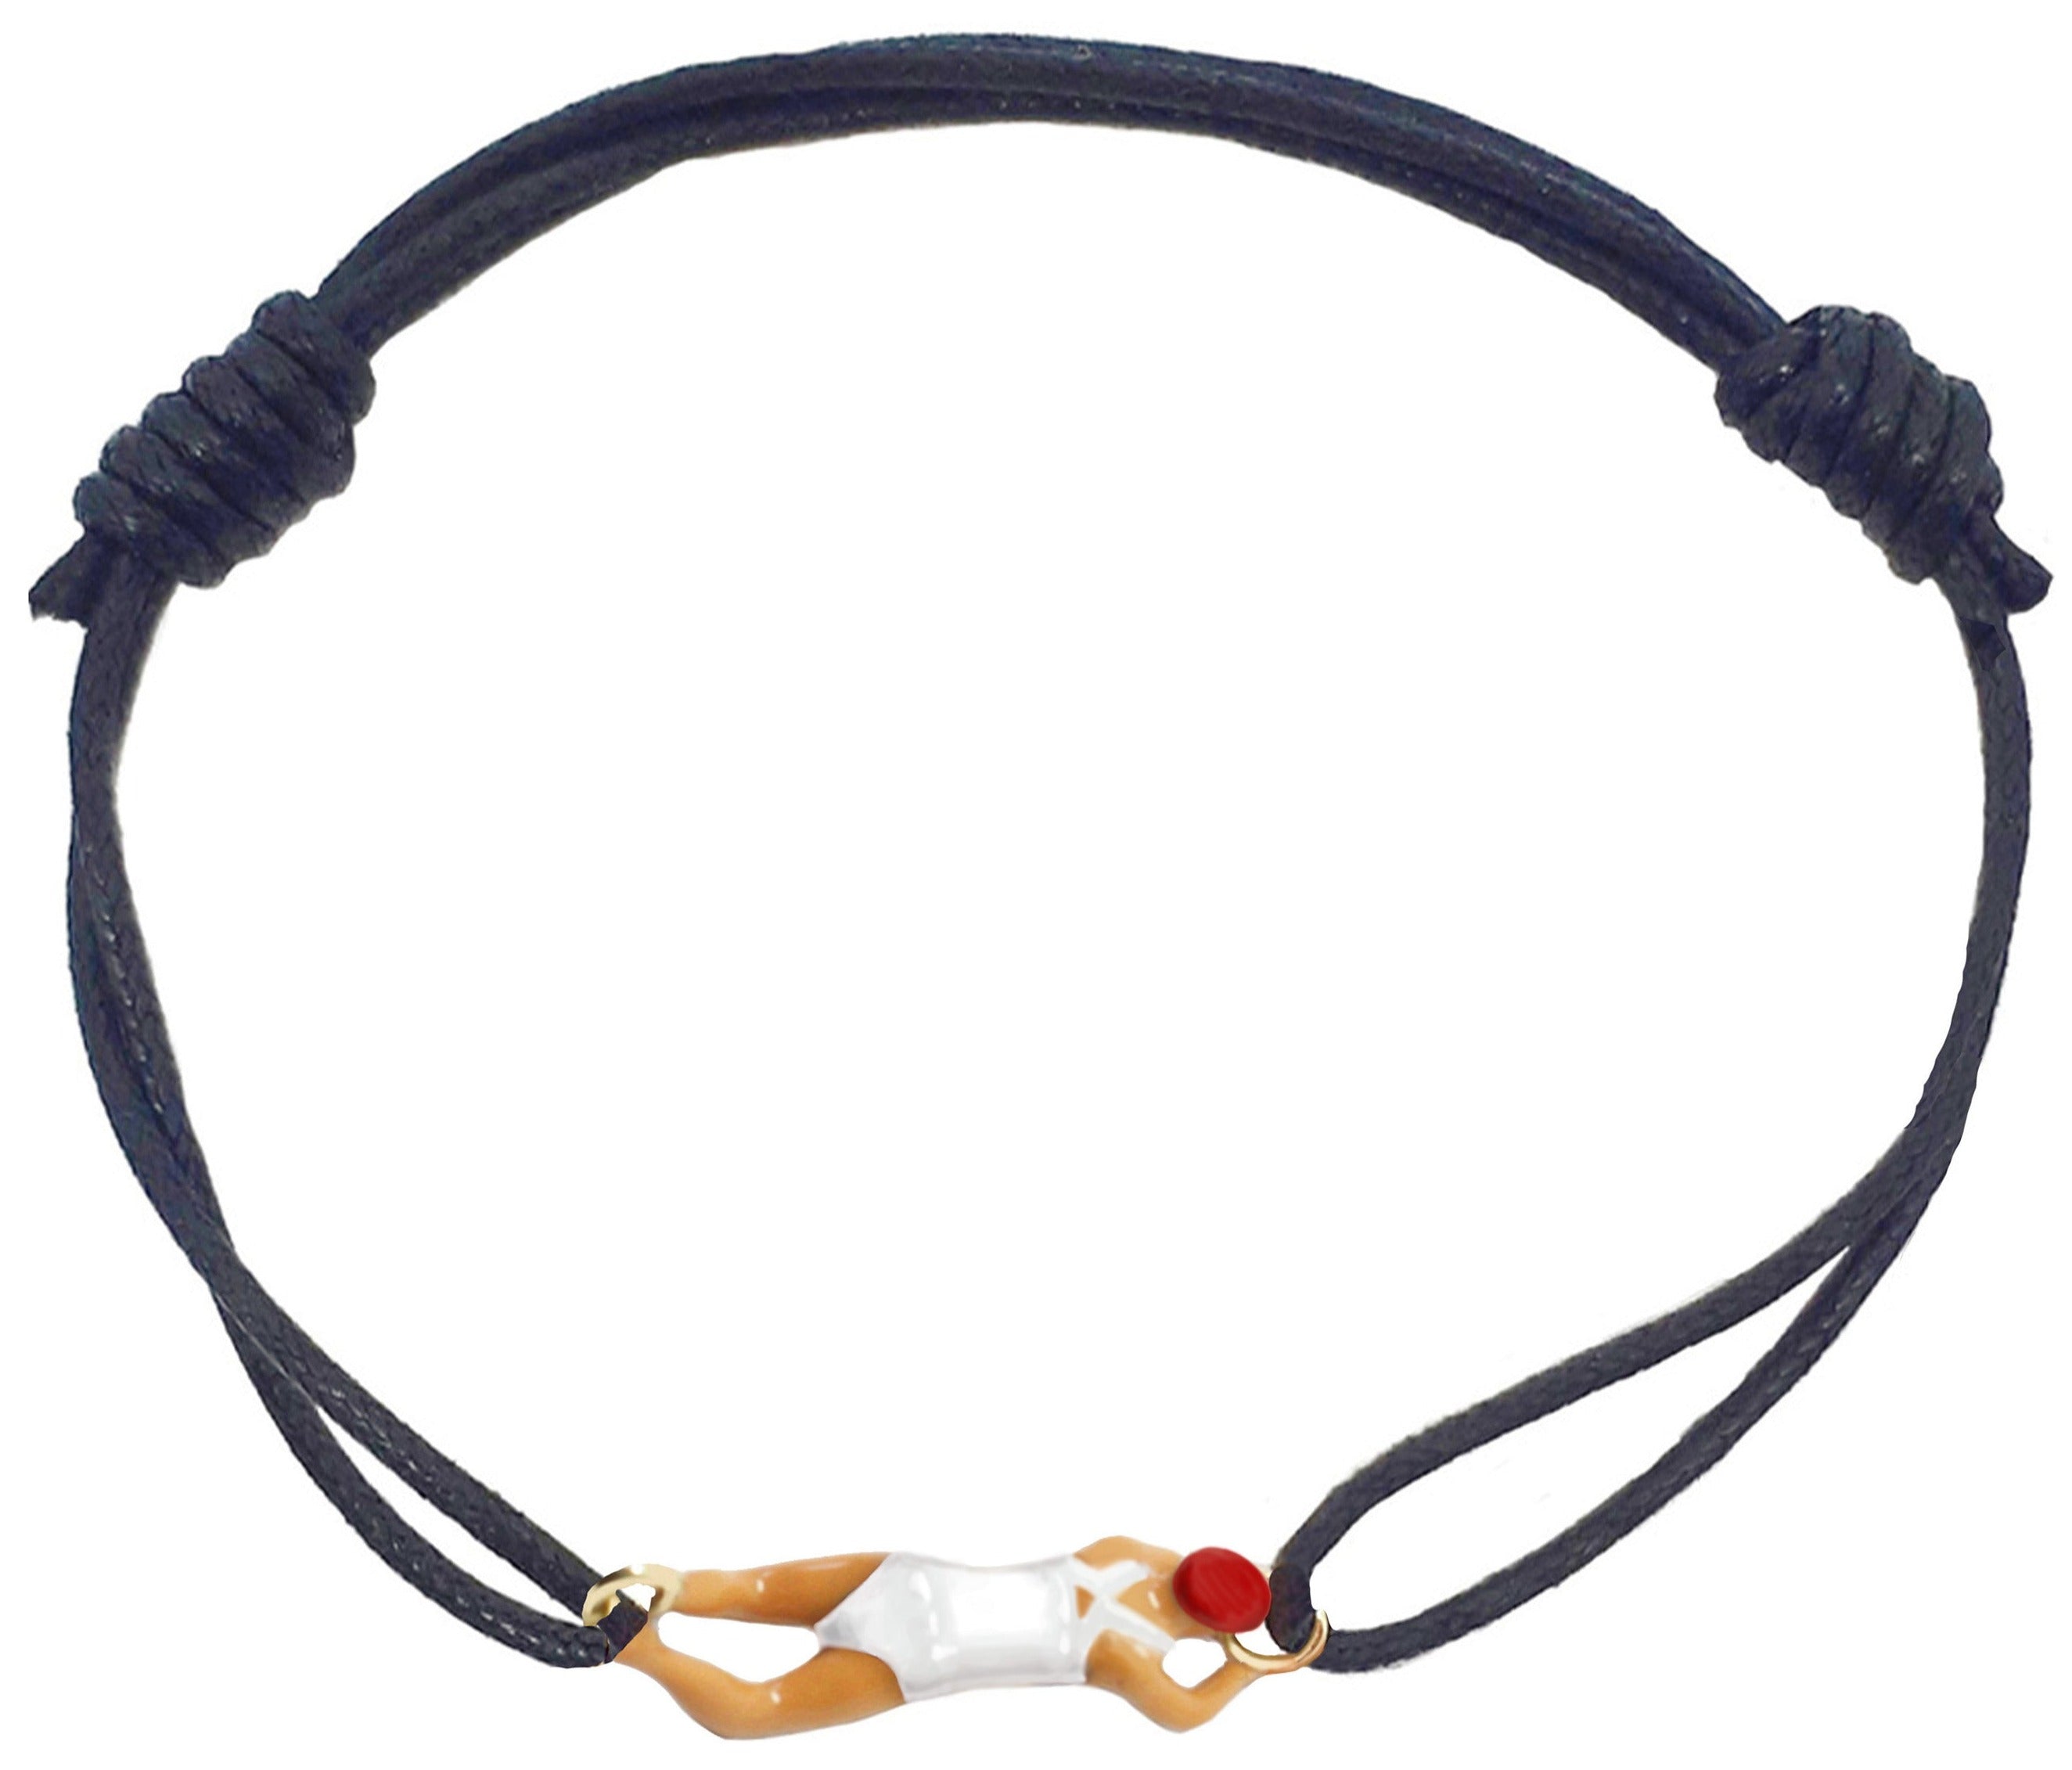 Midnight blue cord bracelet with gold swimmer pendant with white enamel swimsuit